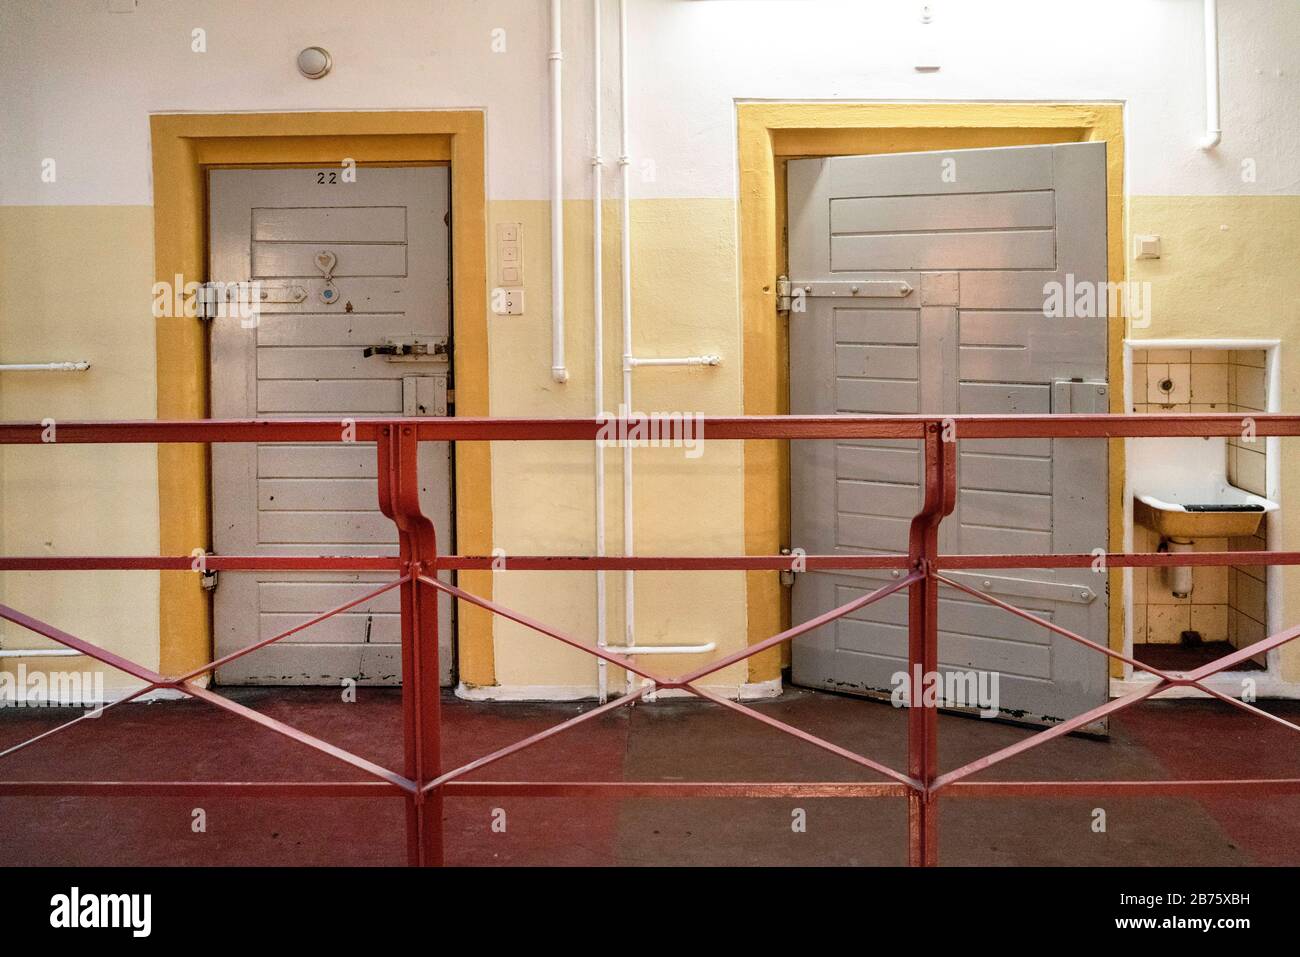 Germany, Berlin, 09.04.2017. The former women's prison SOEHT 7 in Berlin on 09.04.2017. The prison had been attached to the Lichterfelde district court in 1906. [automated translation] Stock Photo